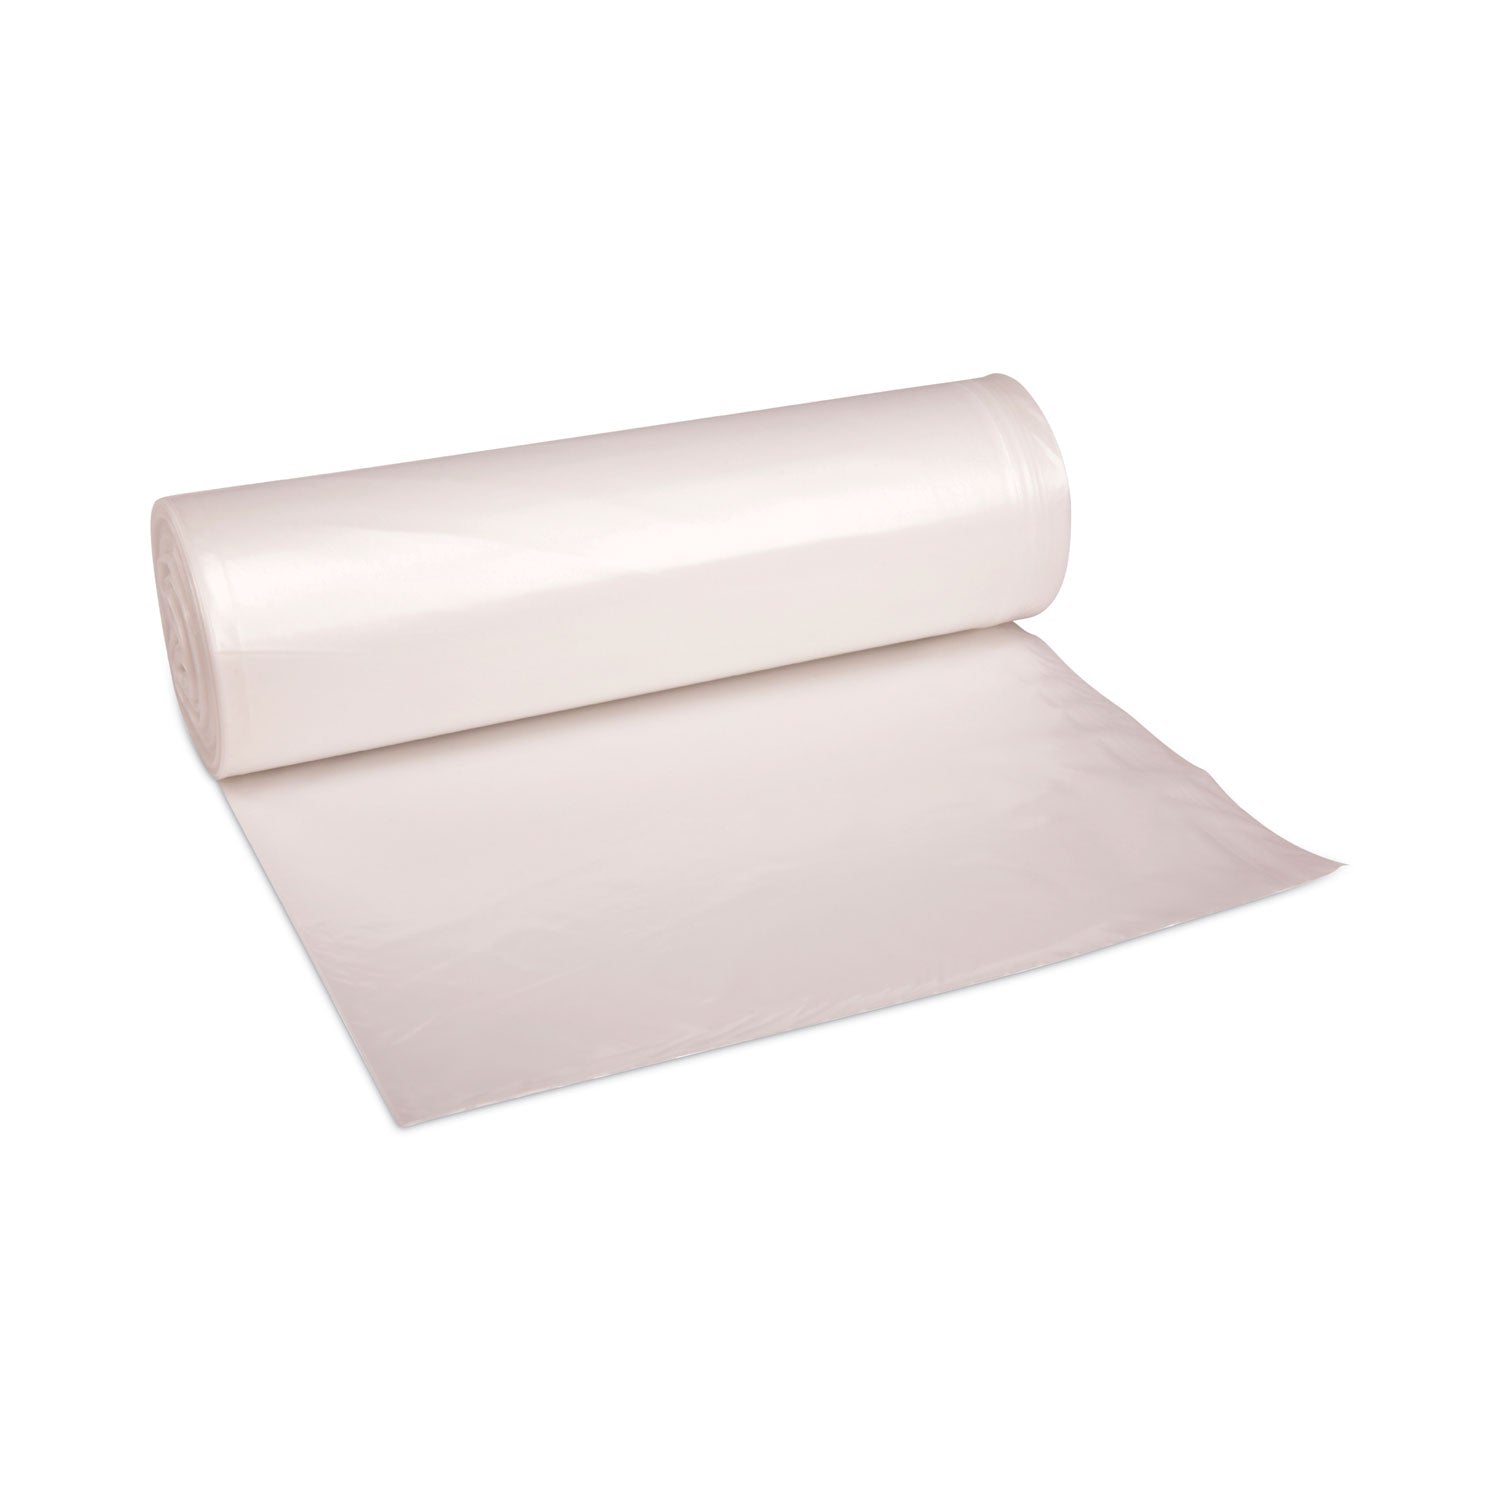 High-Density Can Liners, 60 gal, 19 mic, 38" x 58", Natural, Perforated Roll, 25 Bags/Roll, 6 Rolls/Carton